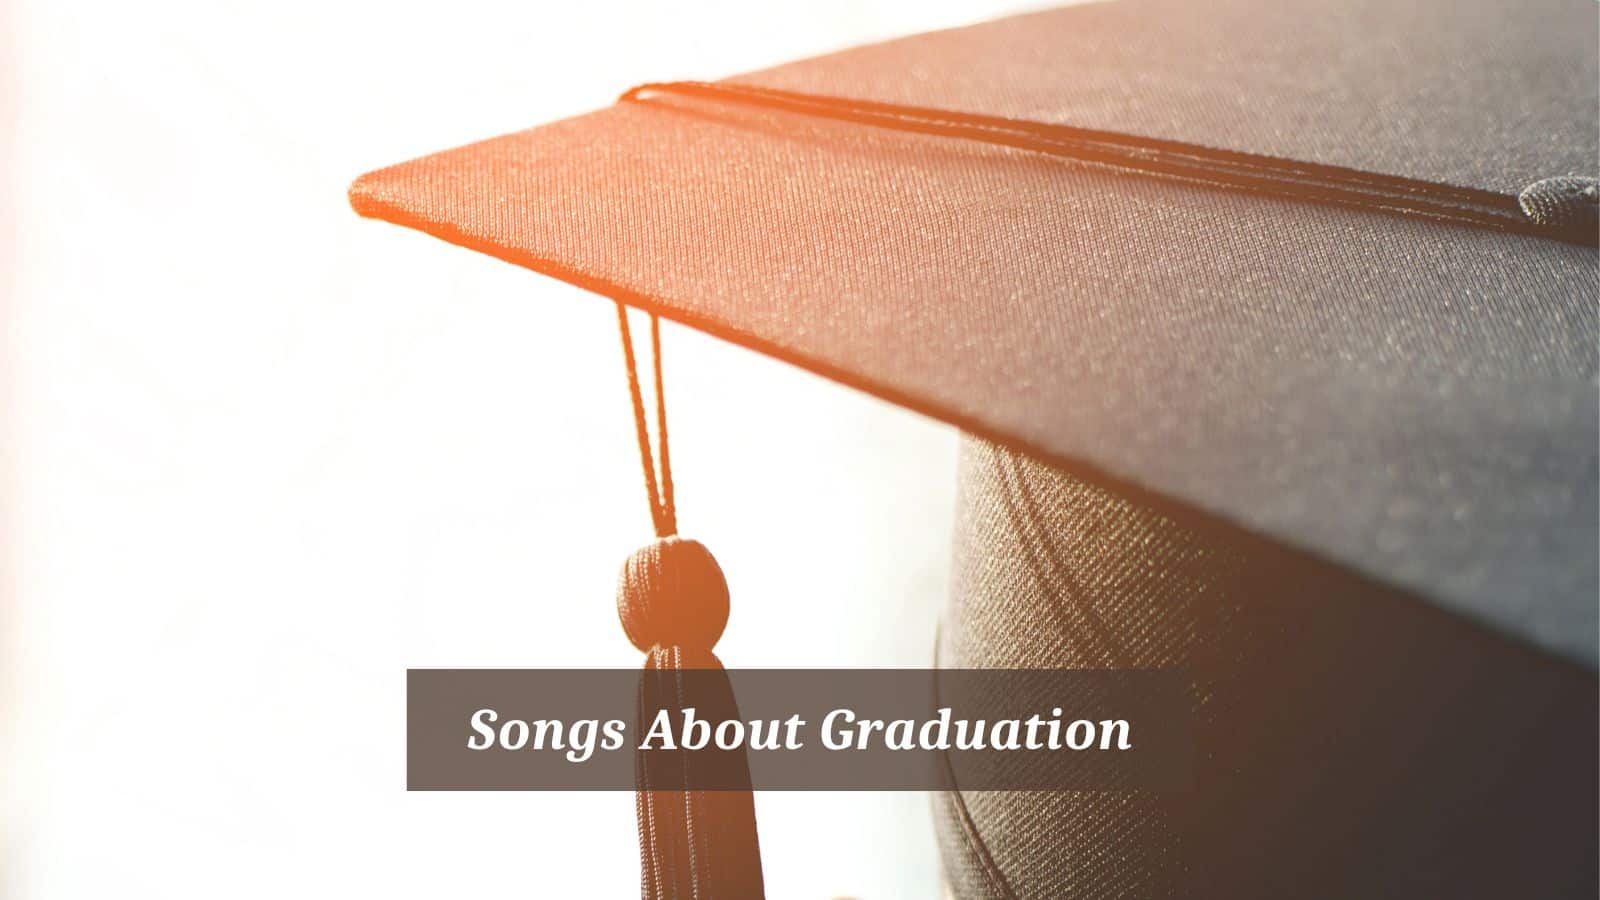 Songs About Graduation